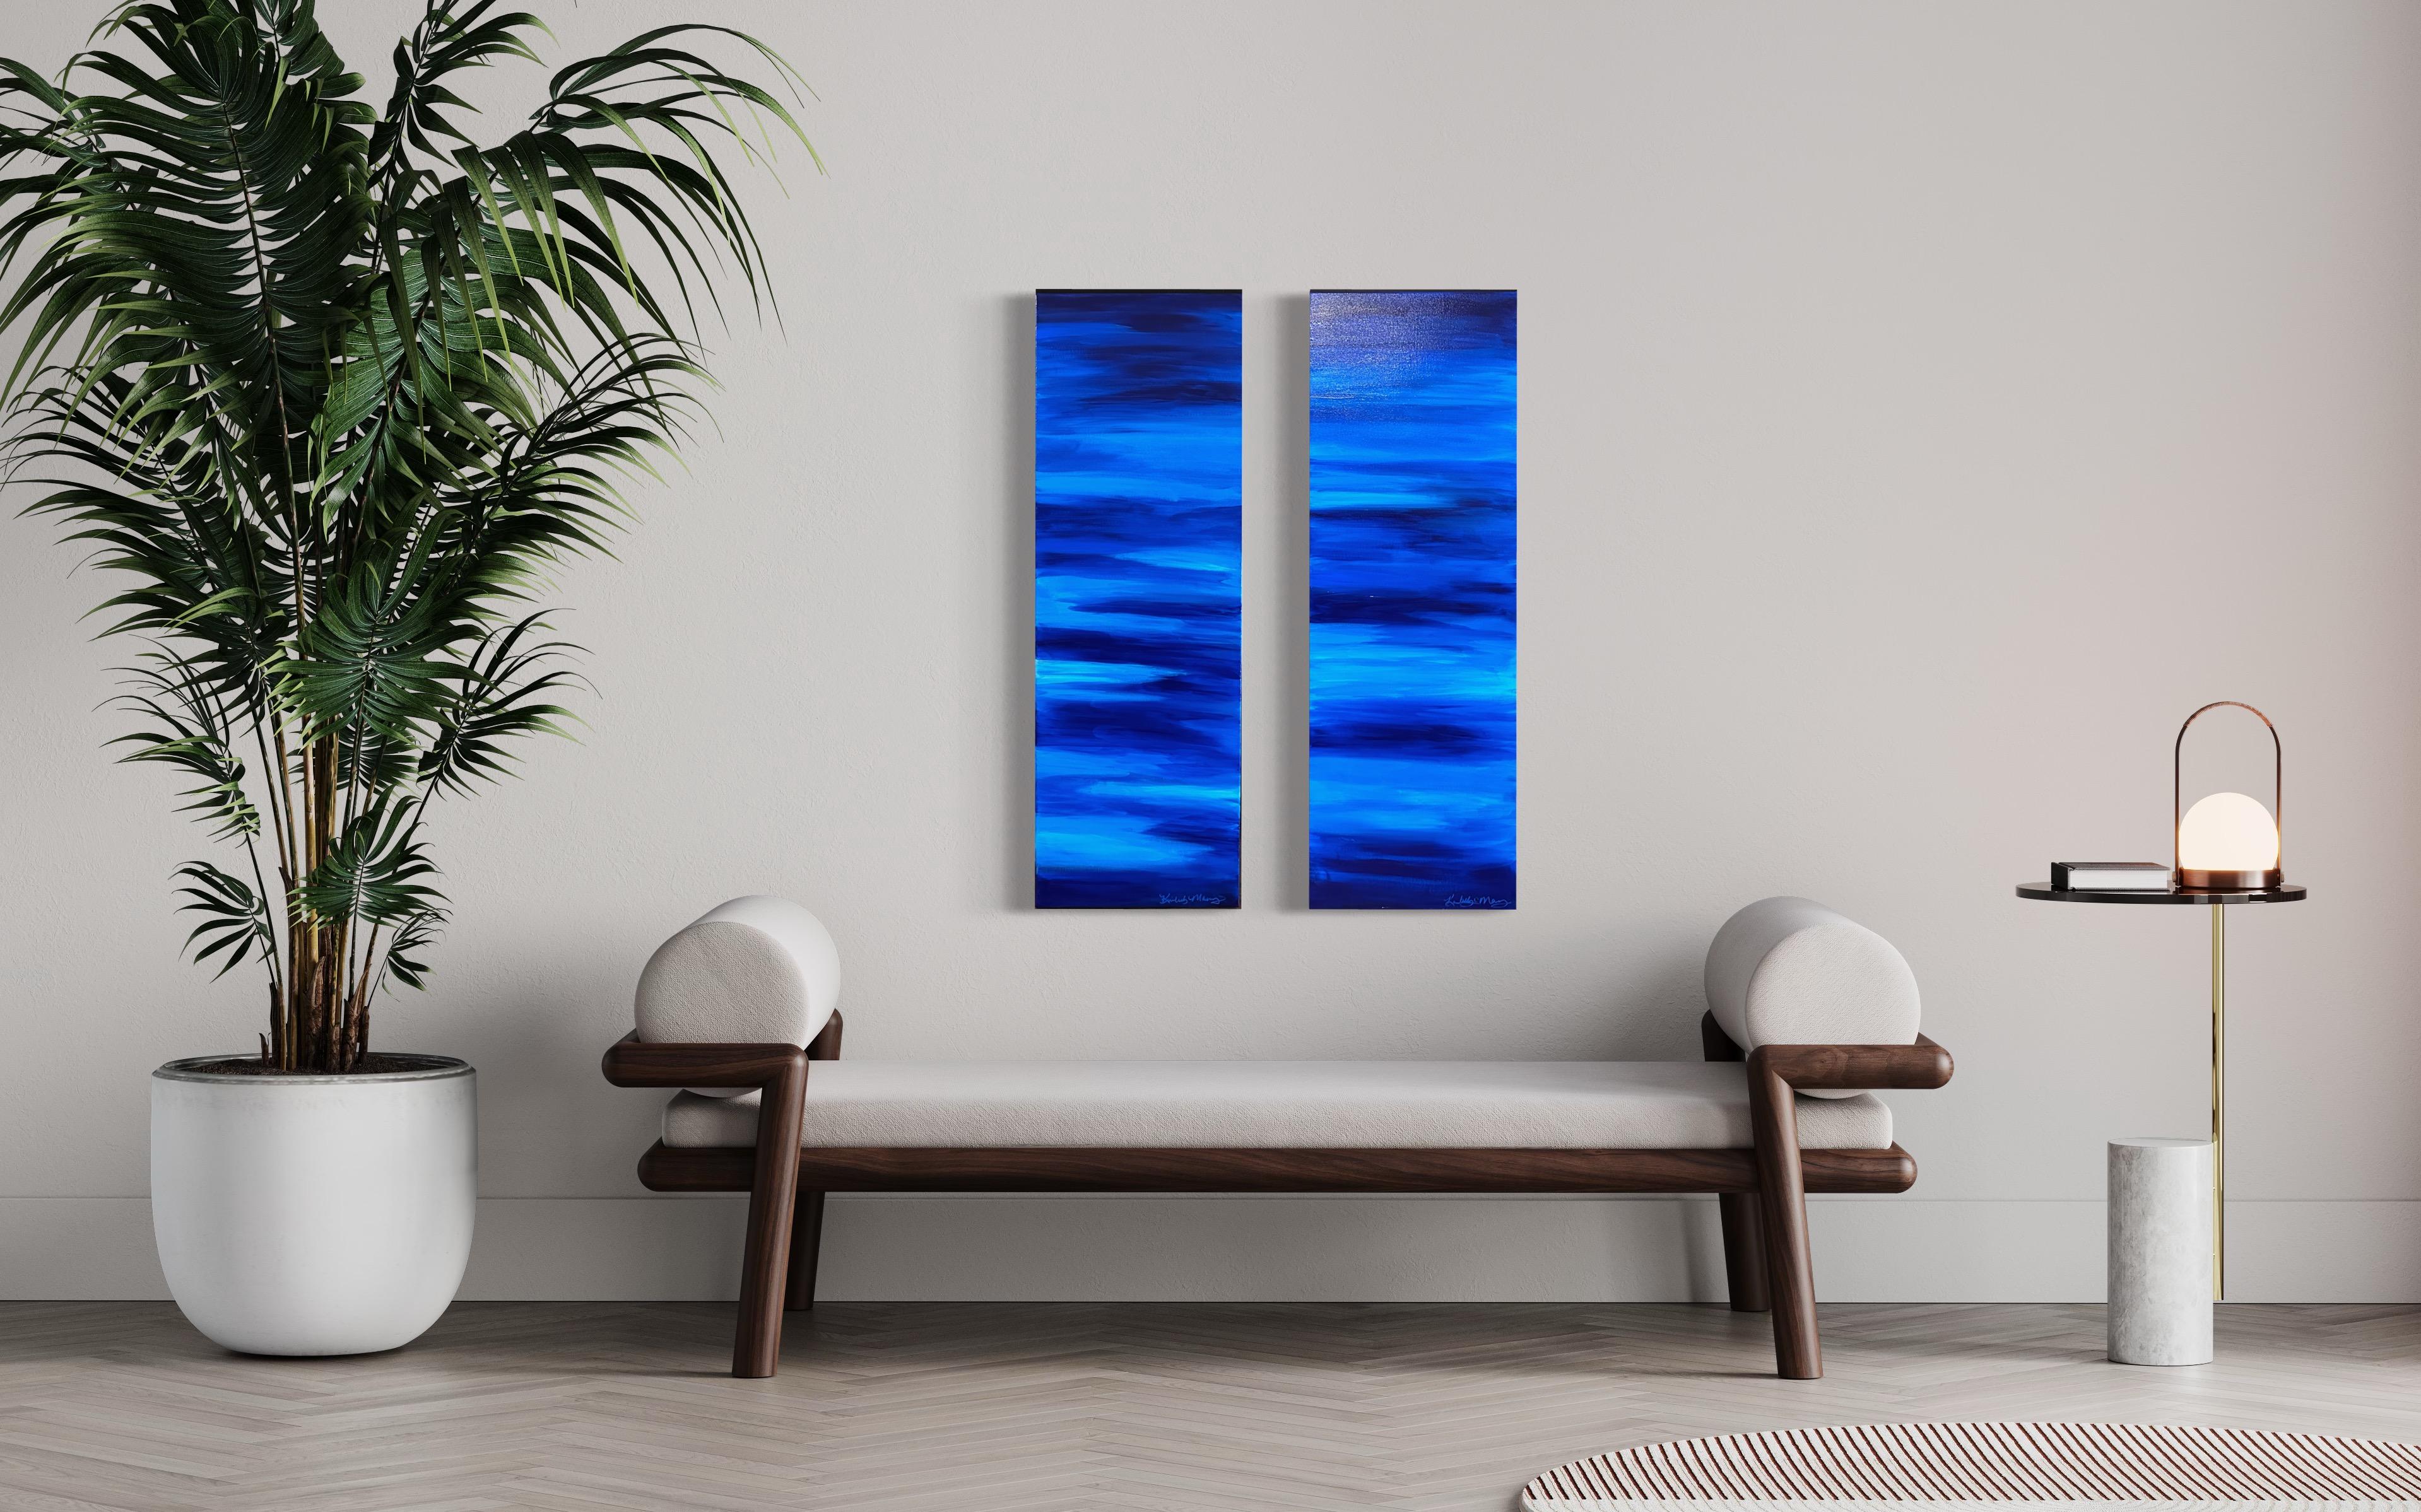 Blue Horizon #1 (Blue, Abstract, Water, Landscape) - Painting by Kimberly Marney